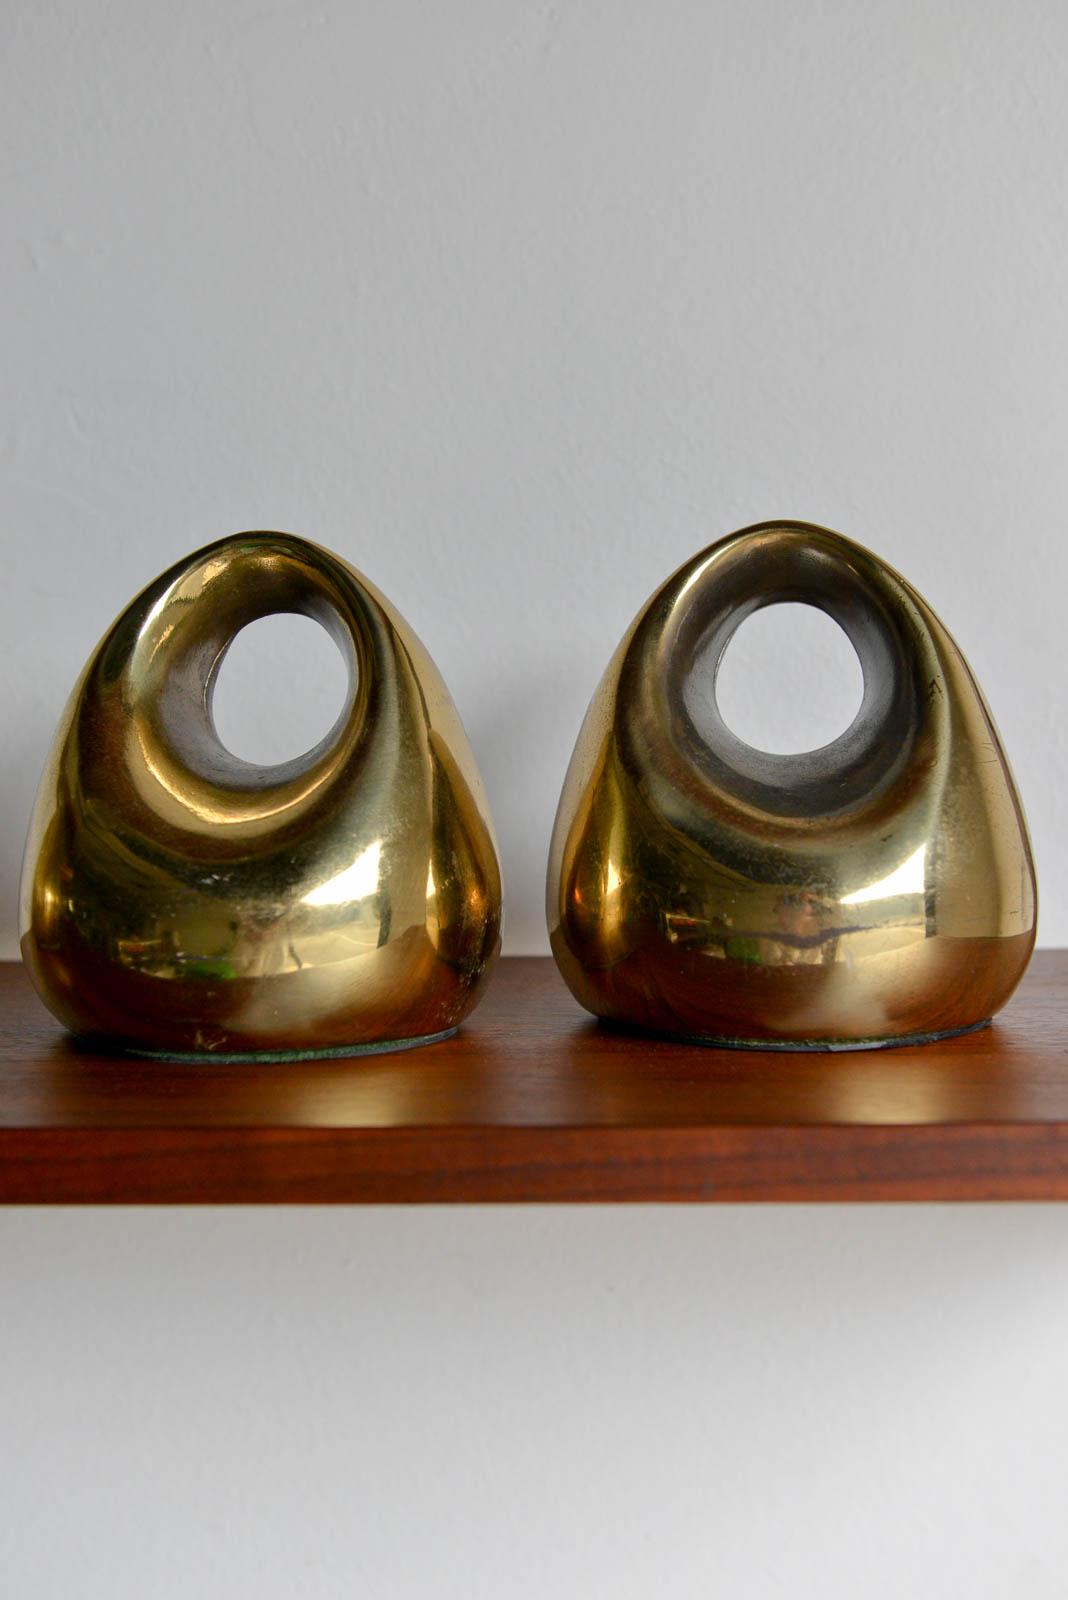 American Brass Bookends by Ben Seibel for Jenfred Ware, ca. 1960